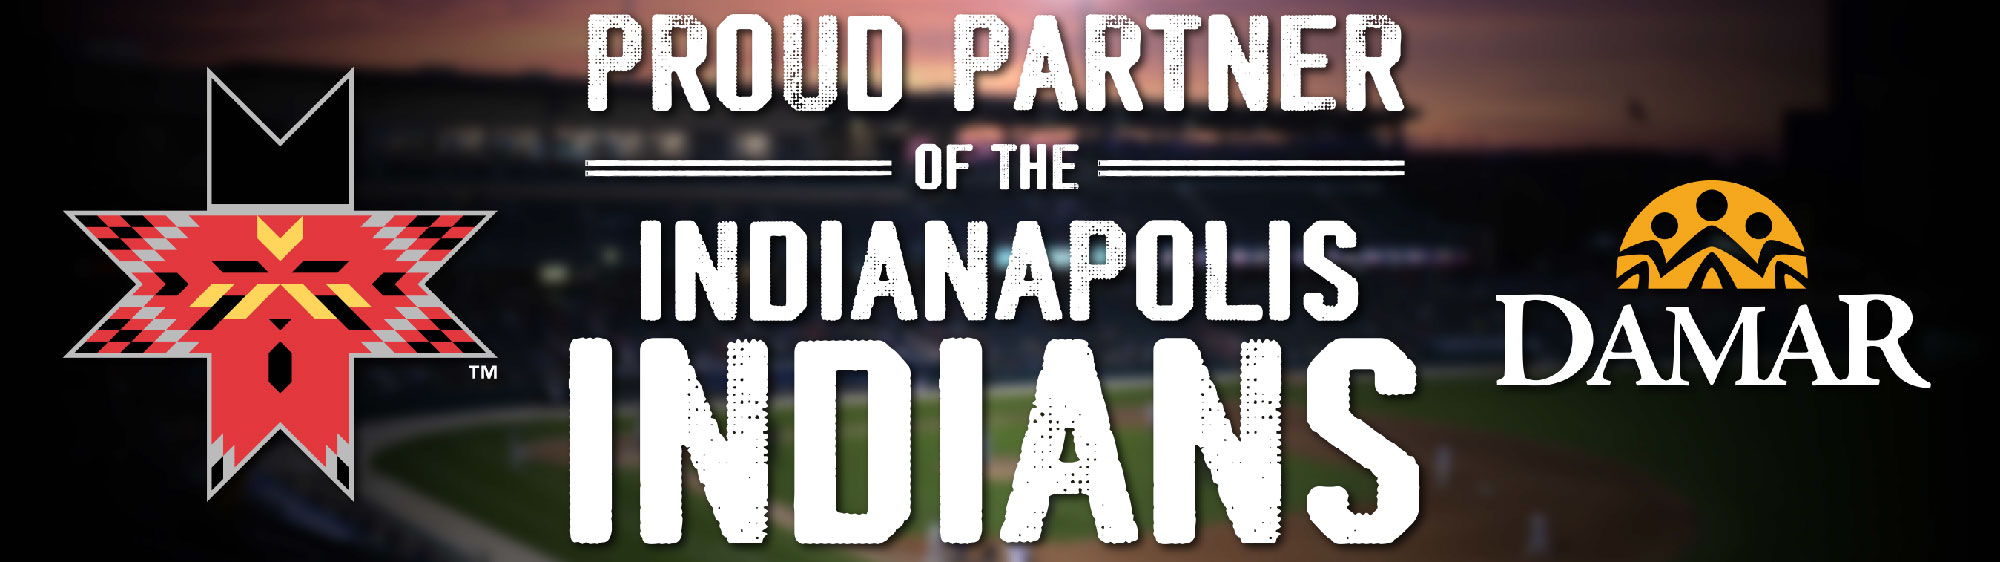 Proud Partner of the Indianapolis Indians